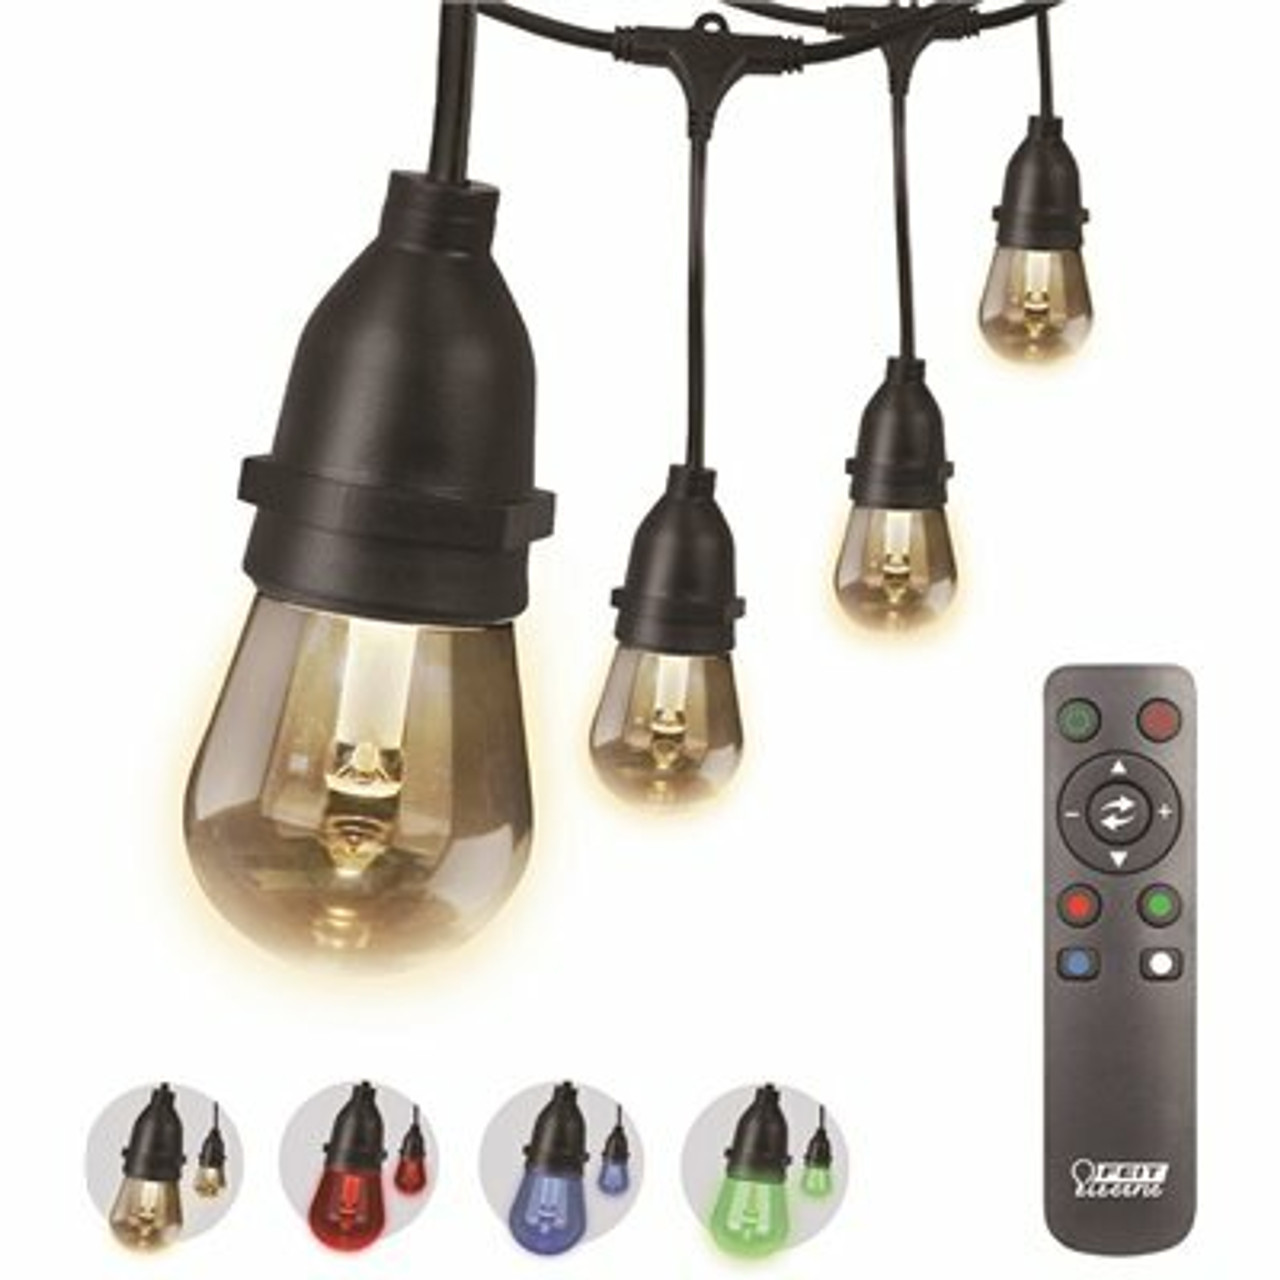 30 Ft. 15-Socket Indoor/Outdoor Color Changing String Light Set With Led Bulbs And Remote Control Included (4-Pack)